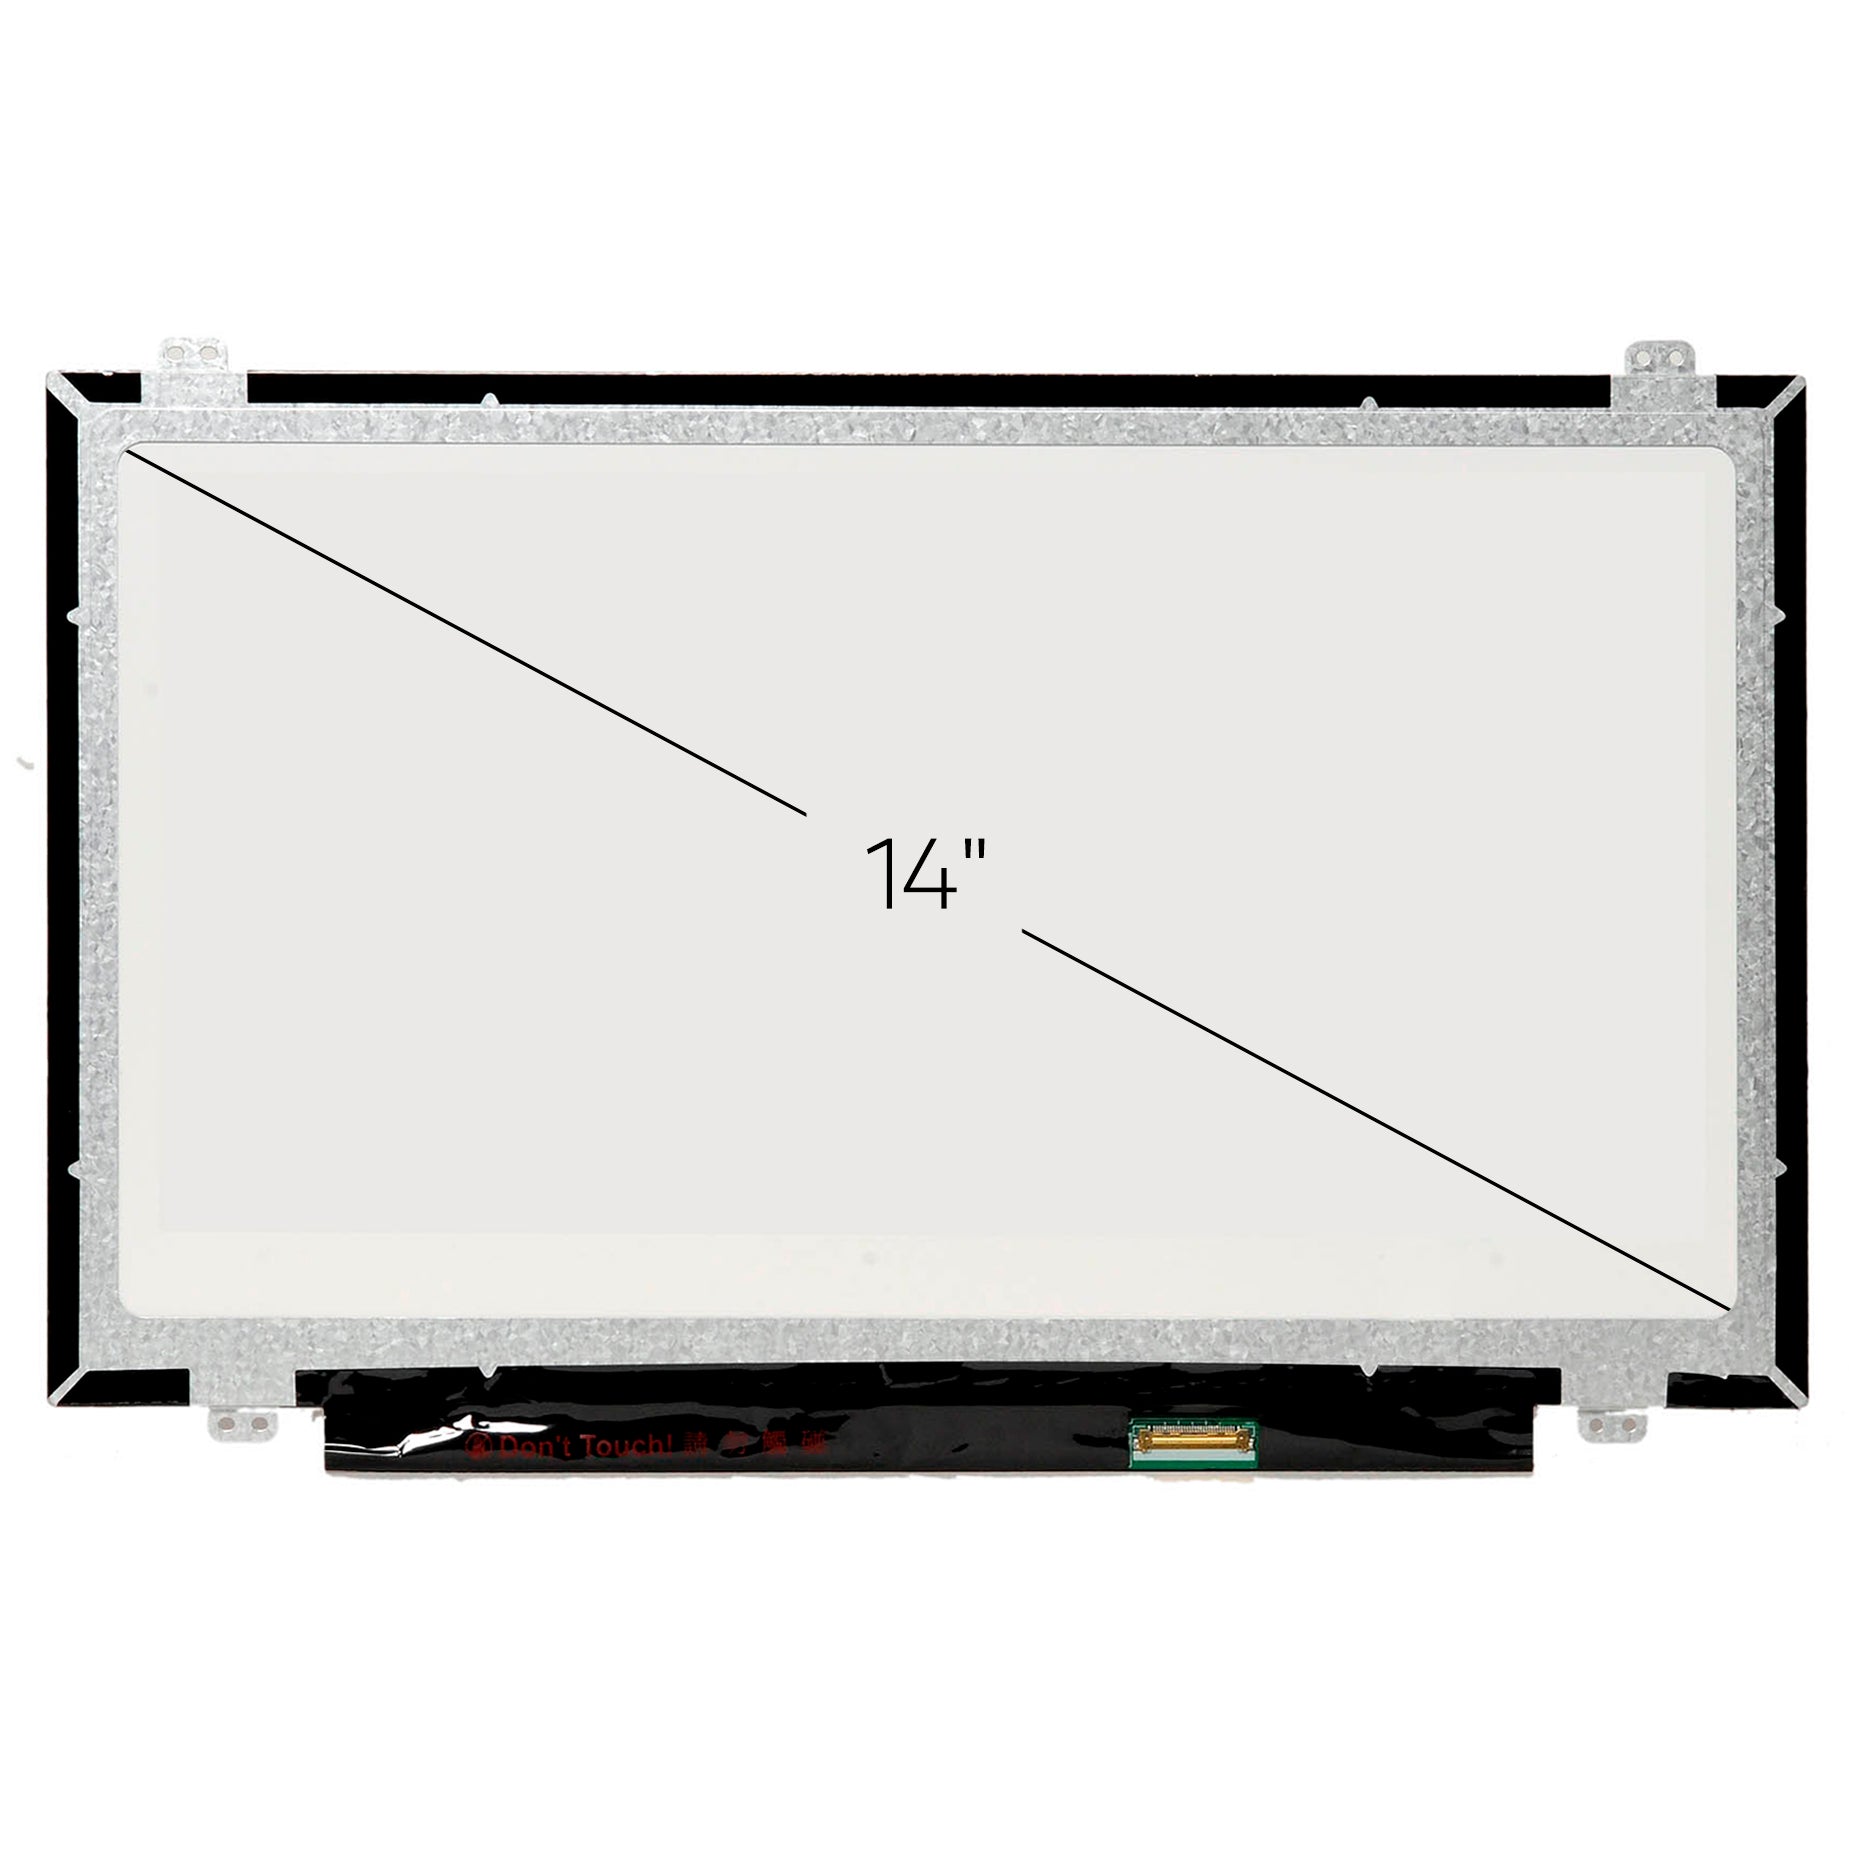 Screen Replacement for Lenovo Chromebook N42 80US HD 1366x768 Glossy LCD LED Display